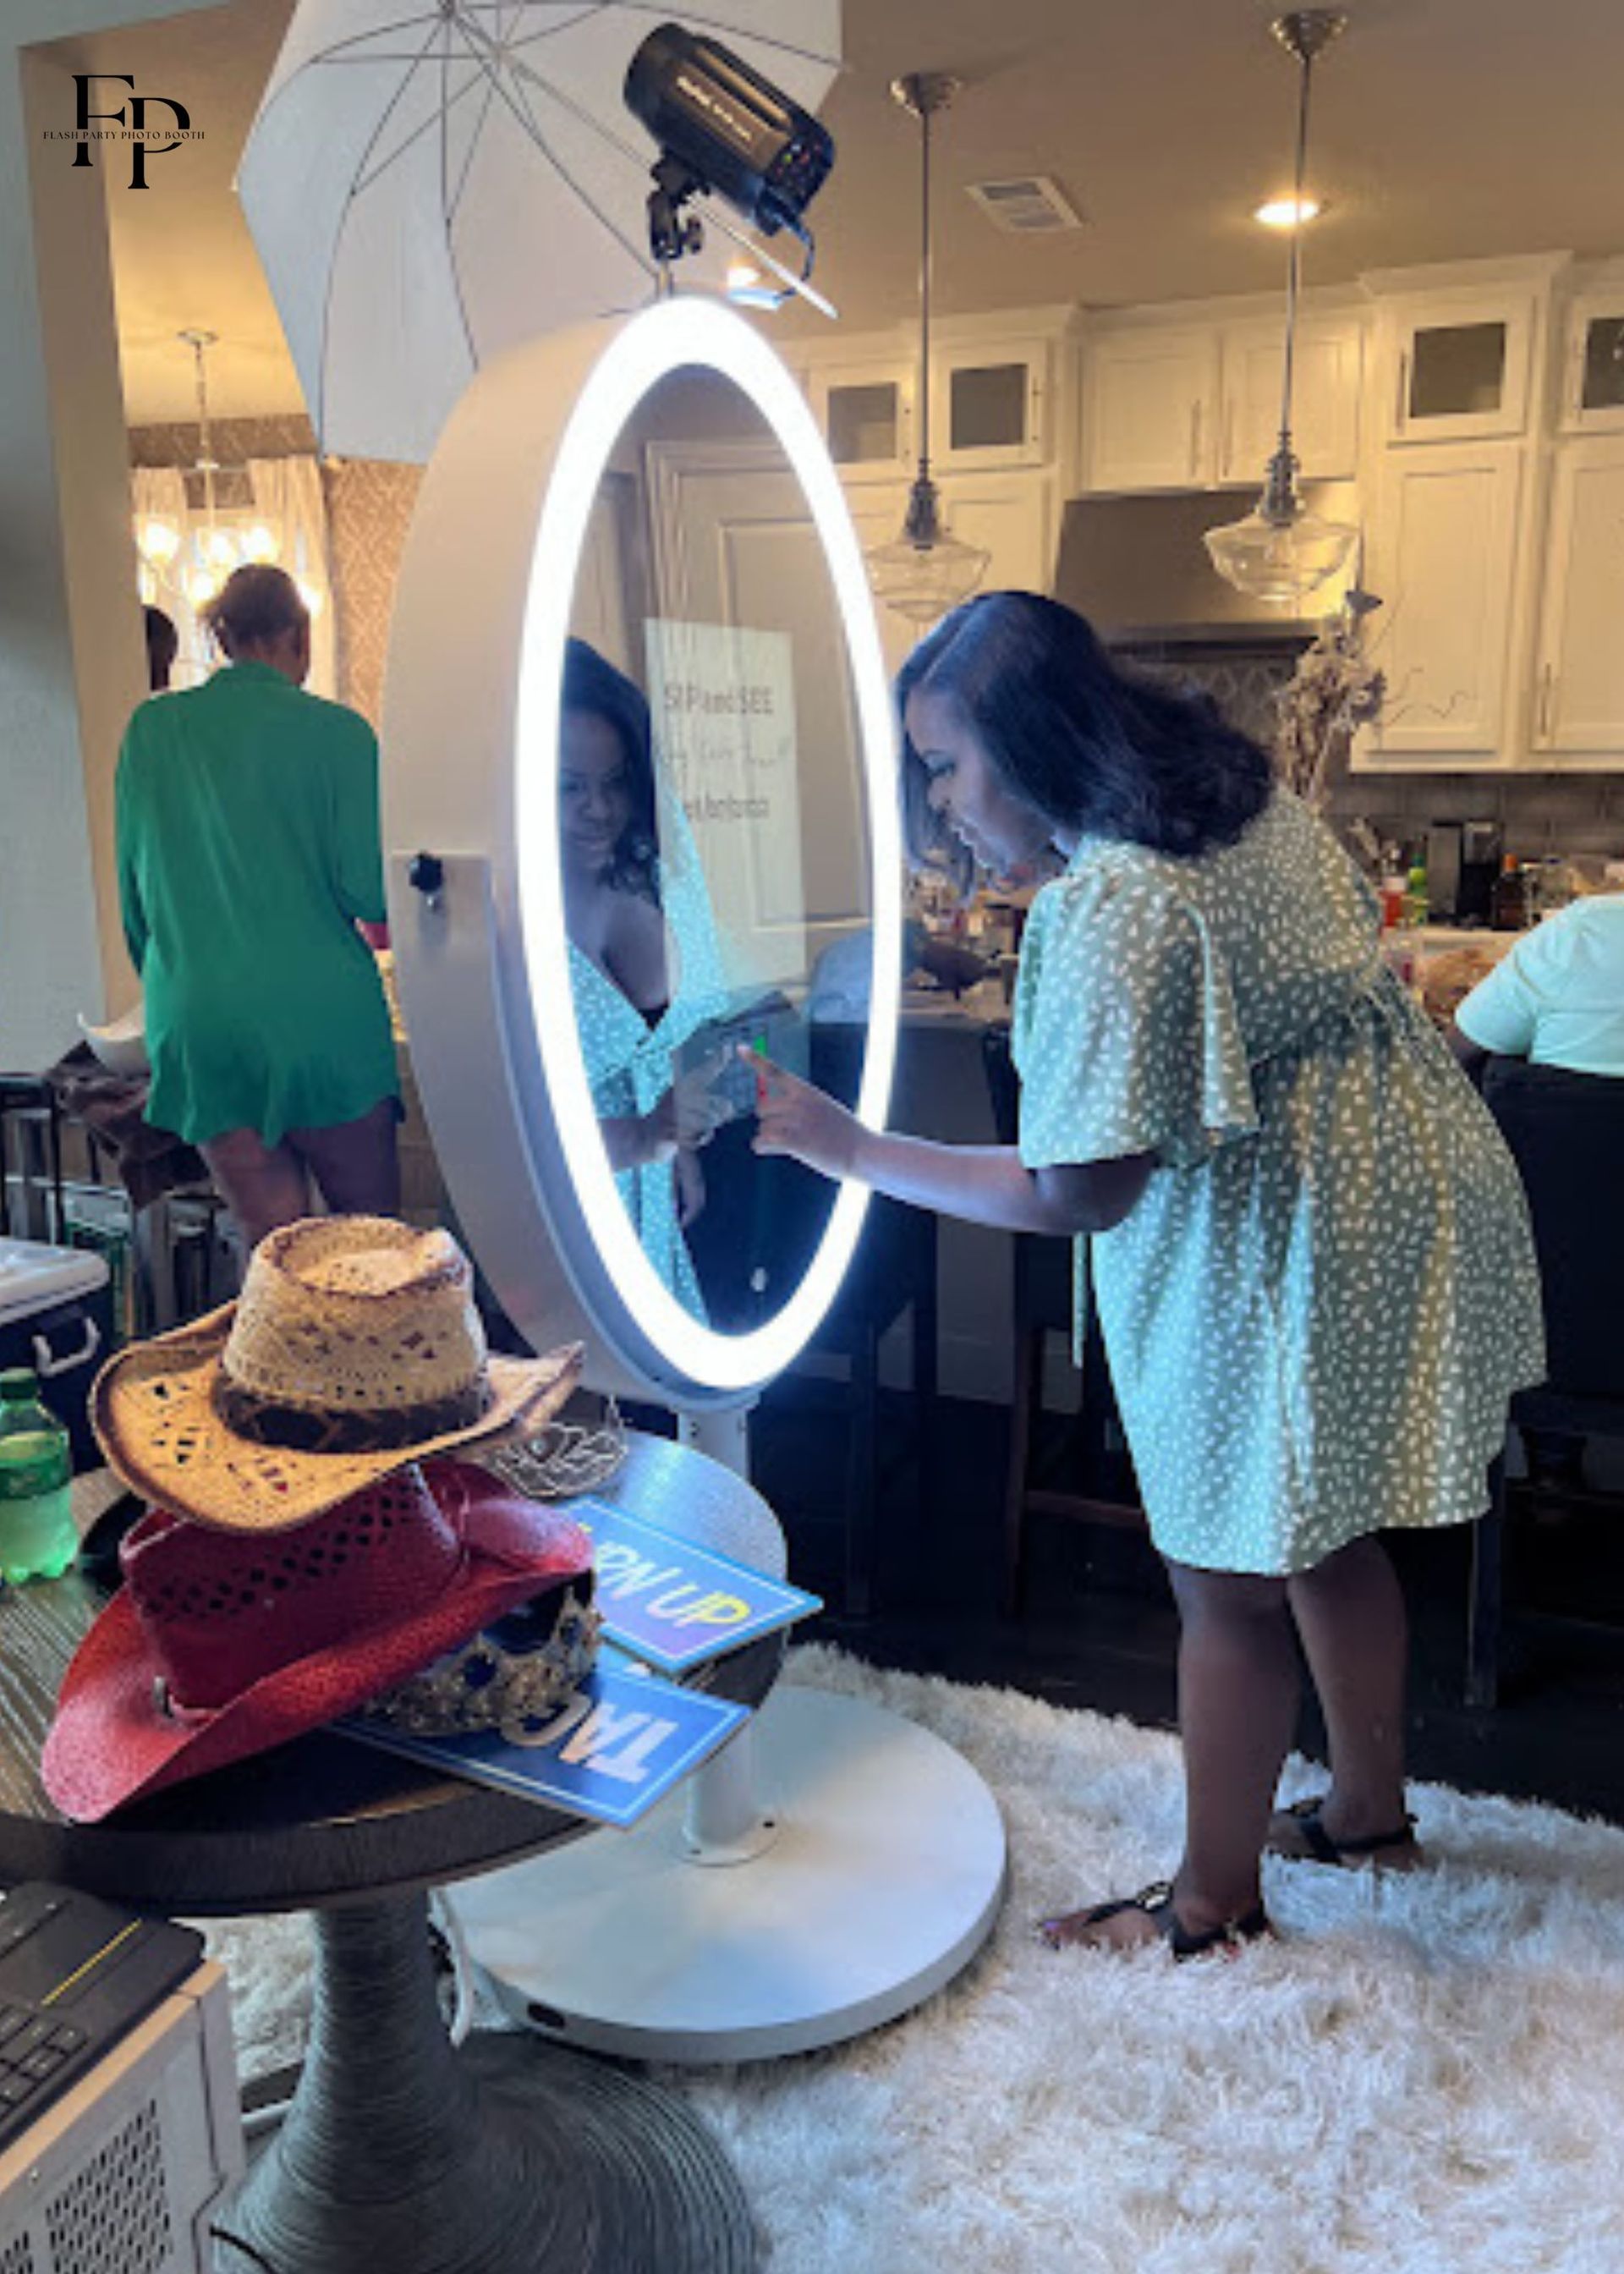 Wedding guest strike a pose in Oval Mirror Photo Booth.